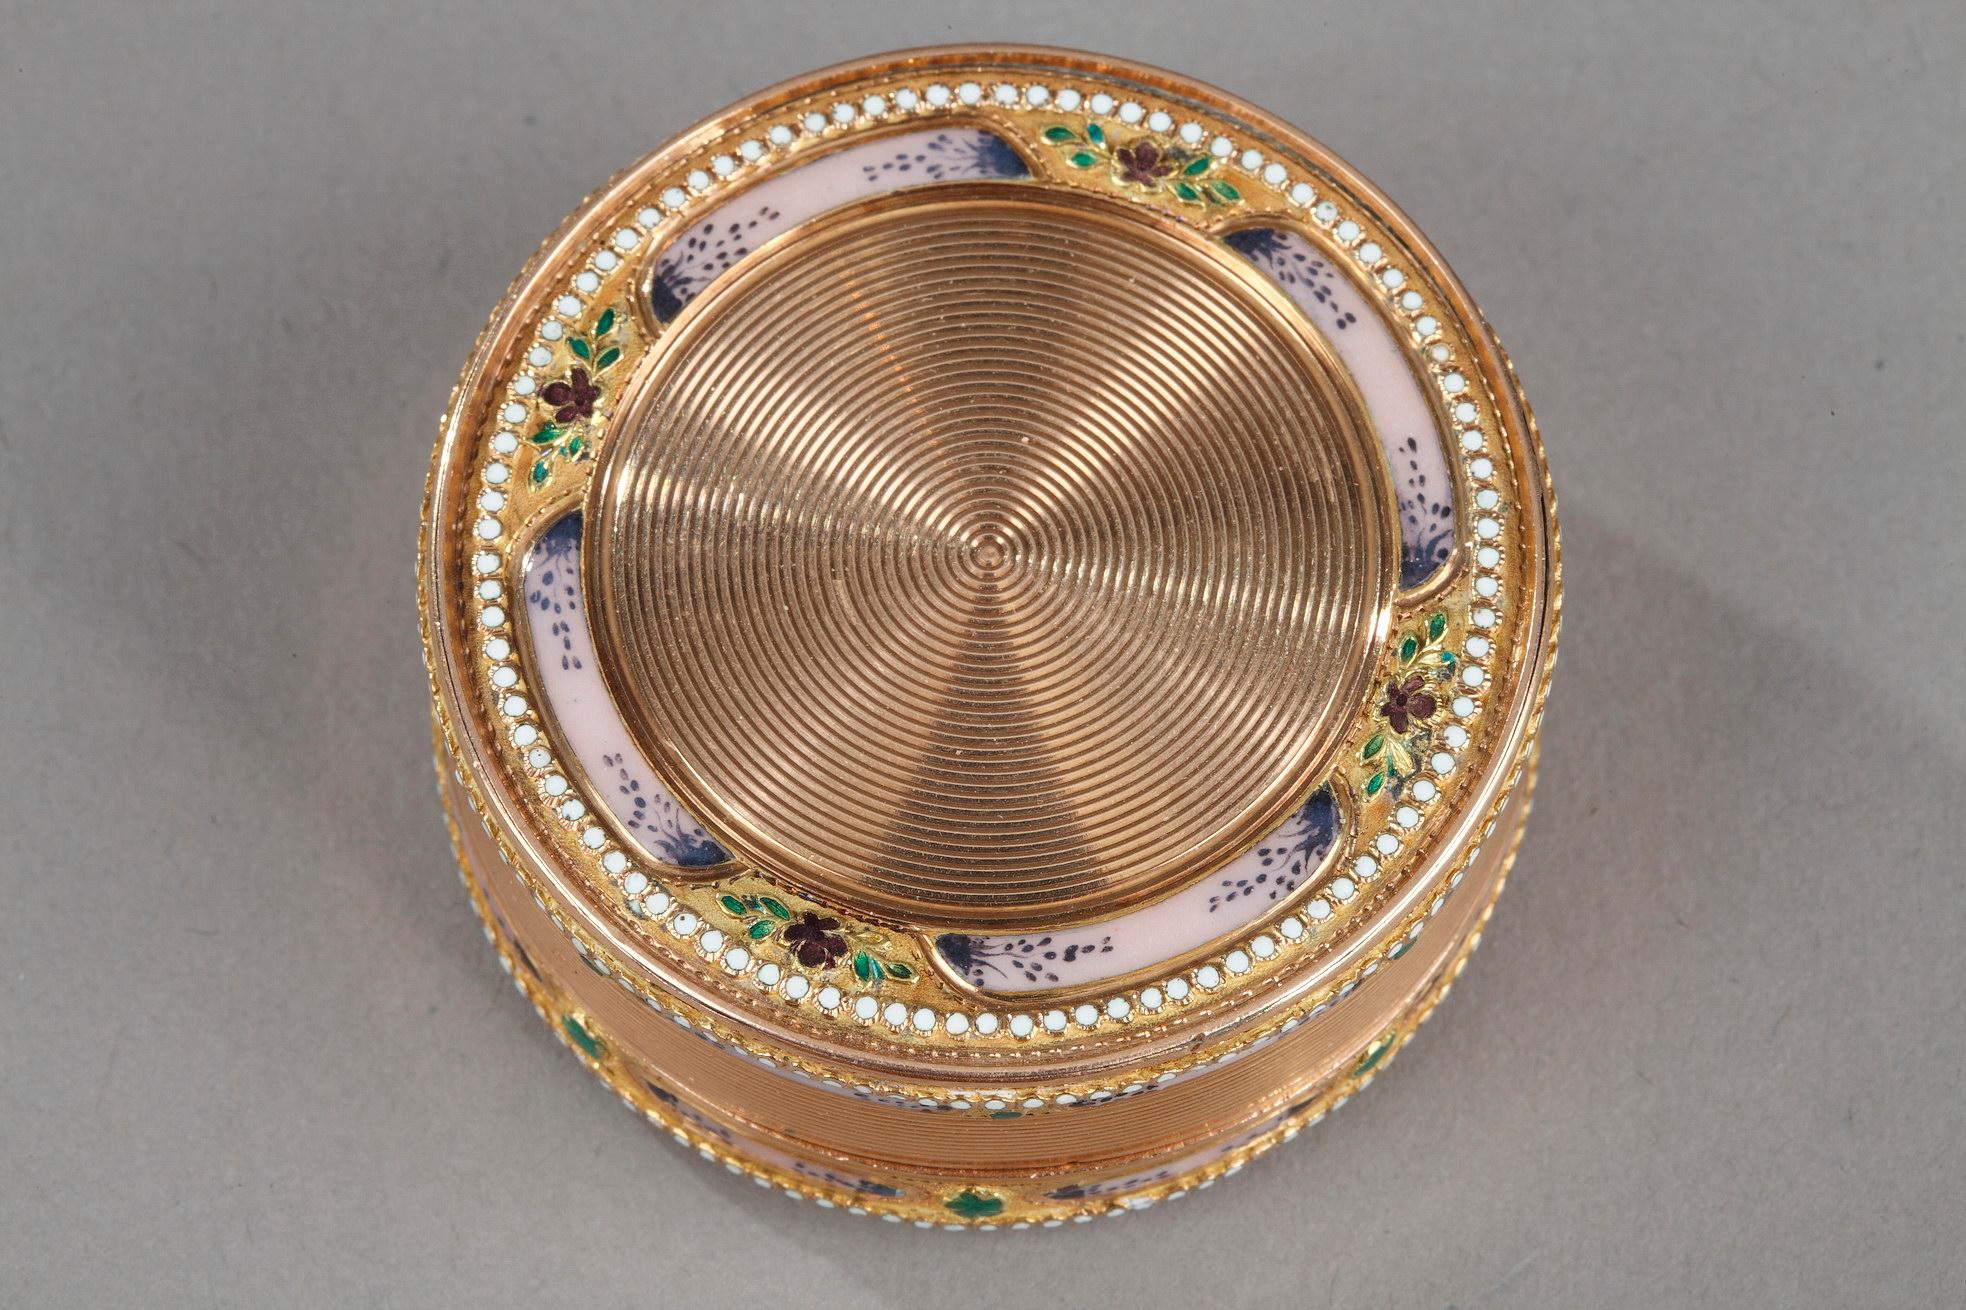 Circular gold and enamelled box. The independent lid decorated with a guilloche in parallel and concentric streaks. This pattern is highlighted by small pink and translucent enamelled panels alternating with green enamel flower patterns. The quality